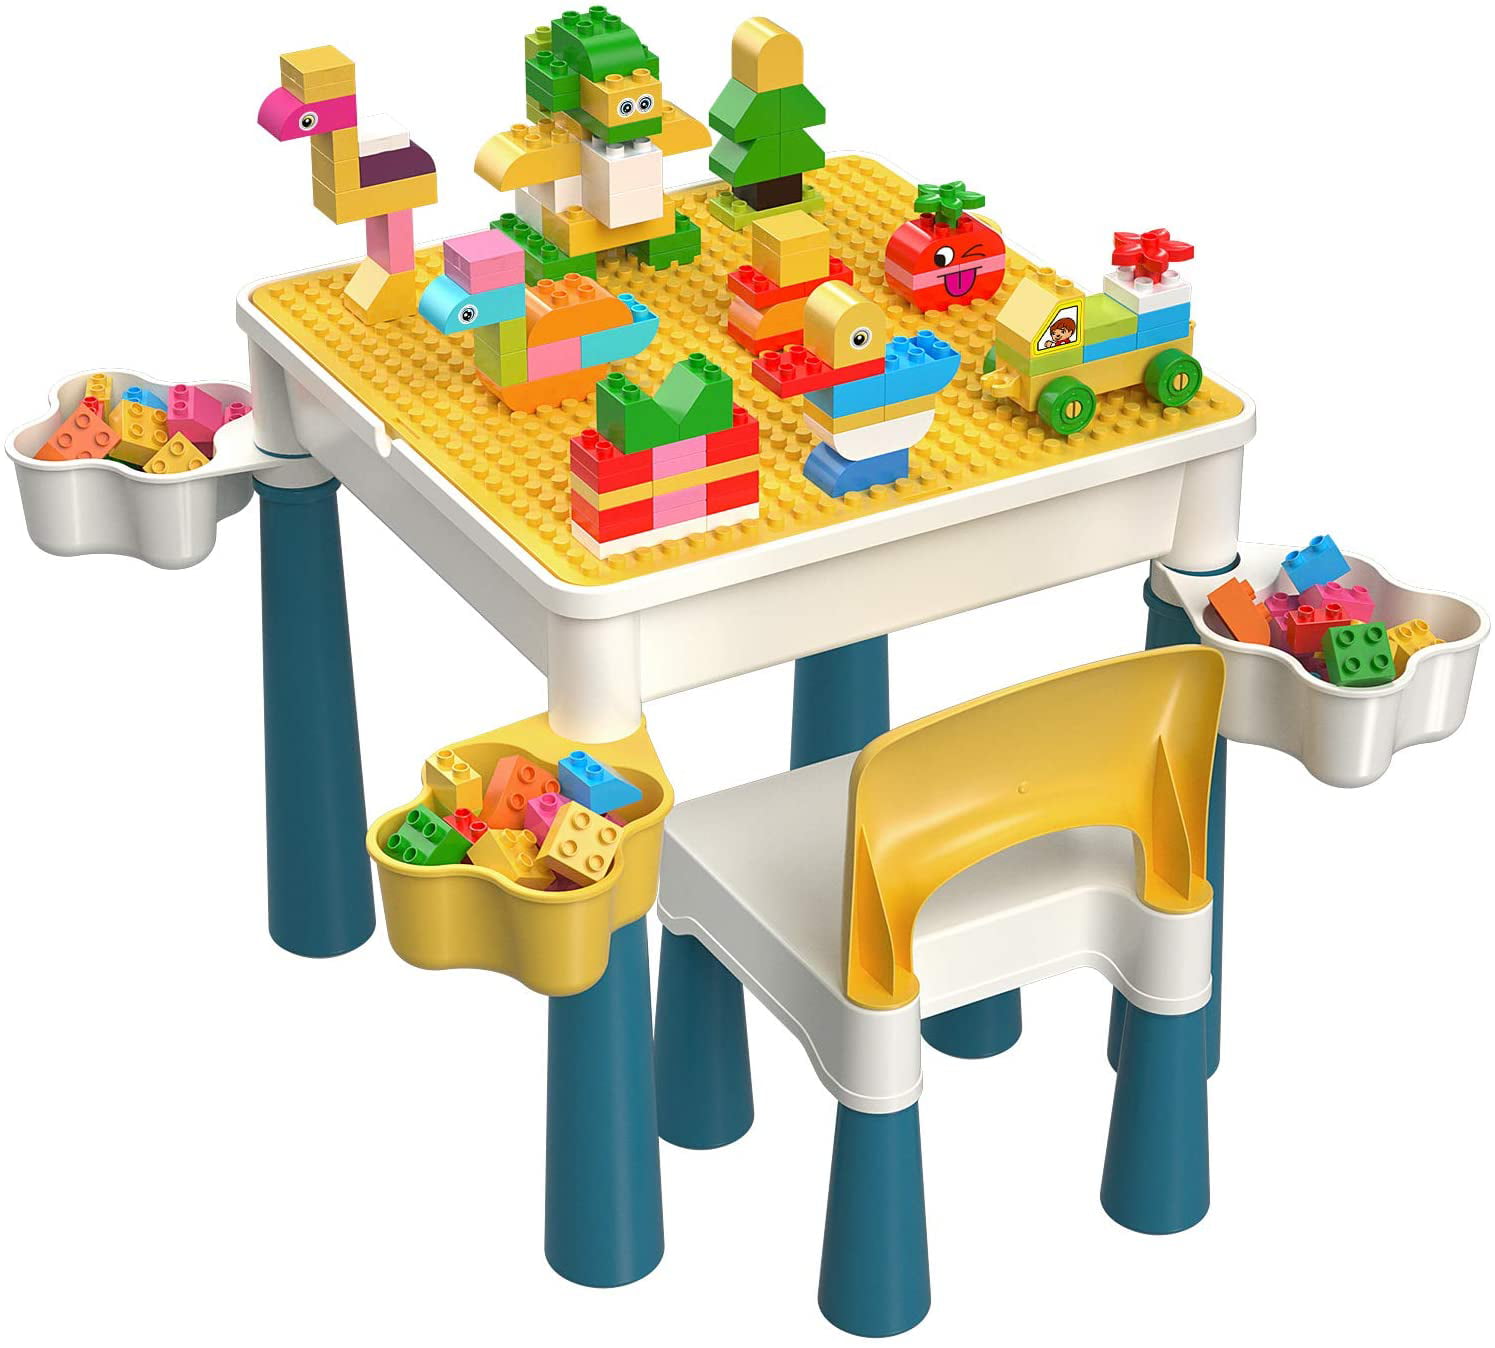 128 Pieces Large Building Blocks Compatible Bricks Toy Kids 5-in-1 Multi Activity Table Set Green Baseplate Board/Blue Color Play Table Includes 1 Chair and Building Block Table with Storage